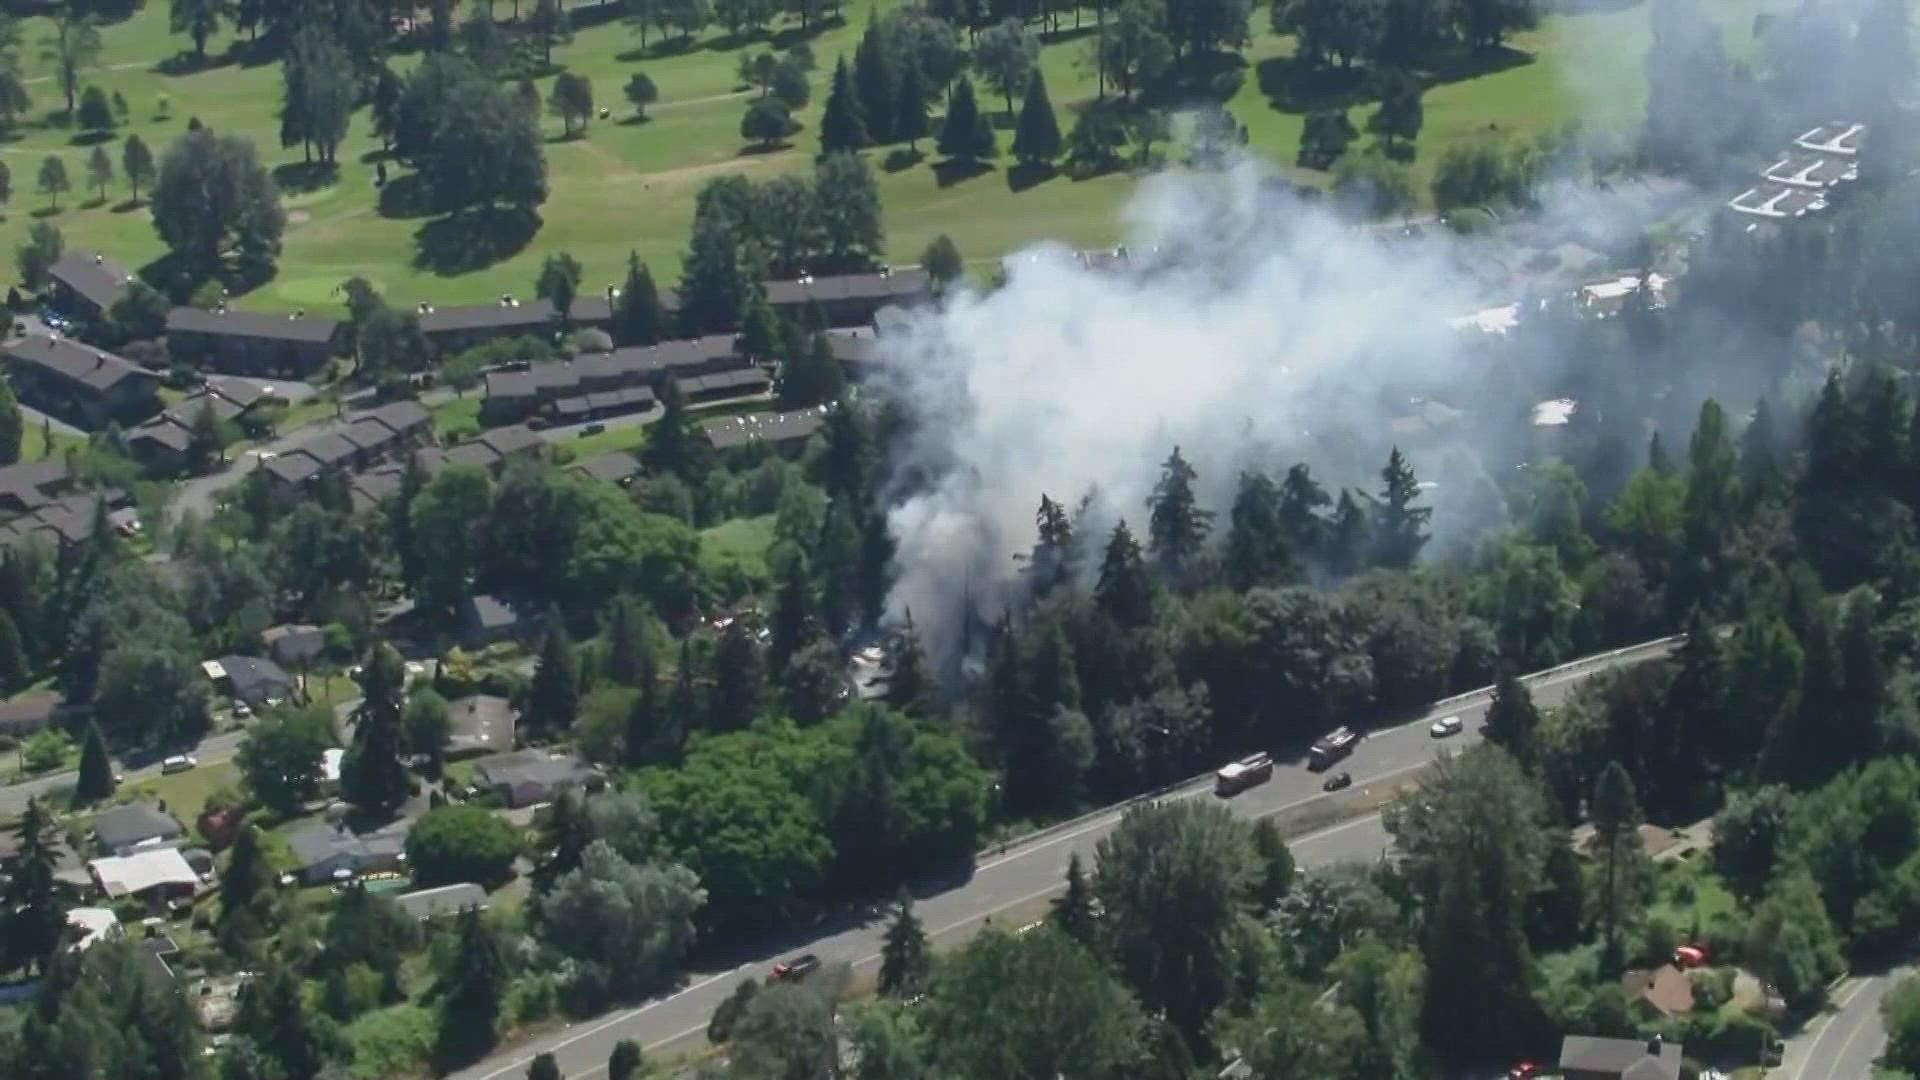 King County Fire District #2 said the fire was near 104th and 8th Ave South. Massive plumes of smoke could be seen from the home.